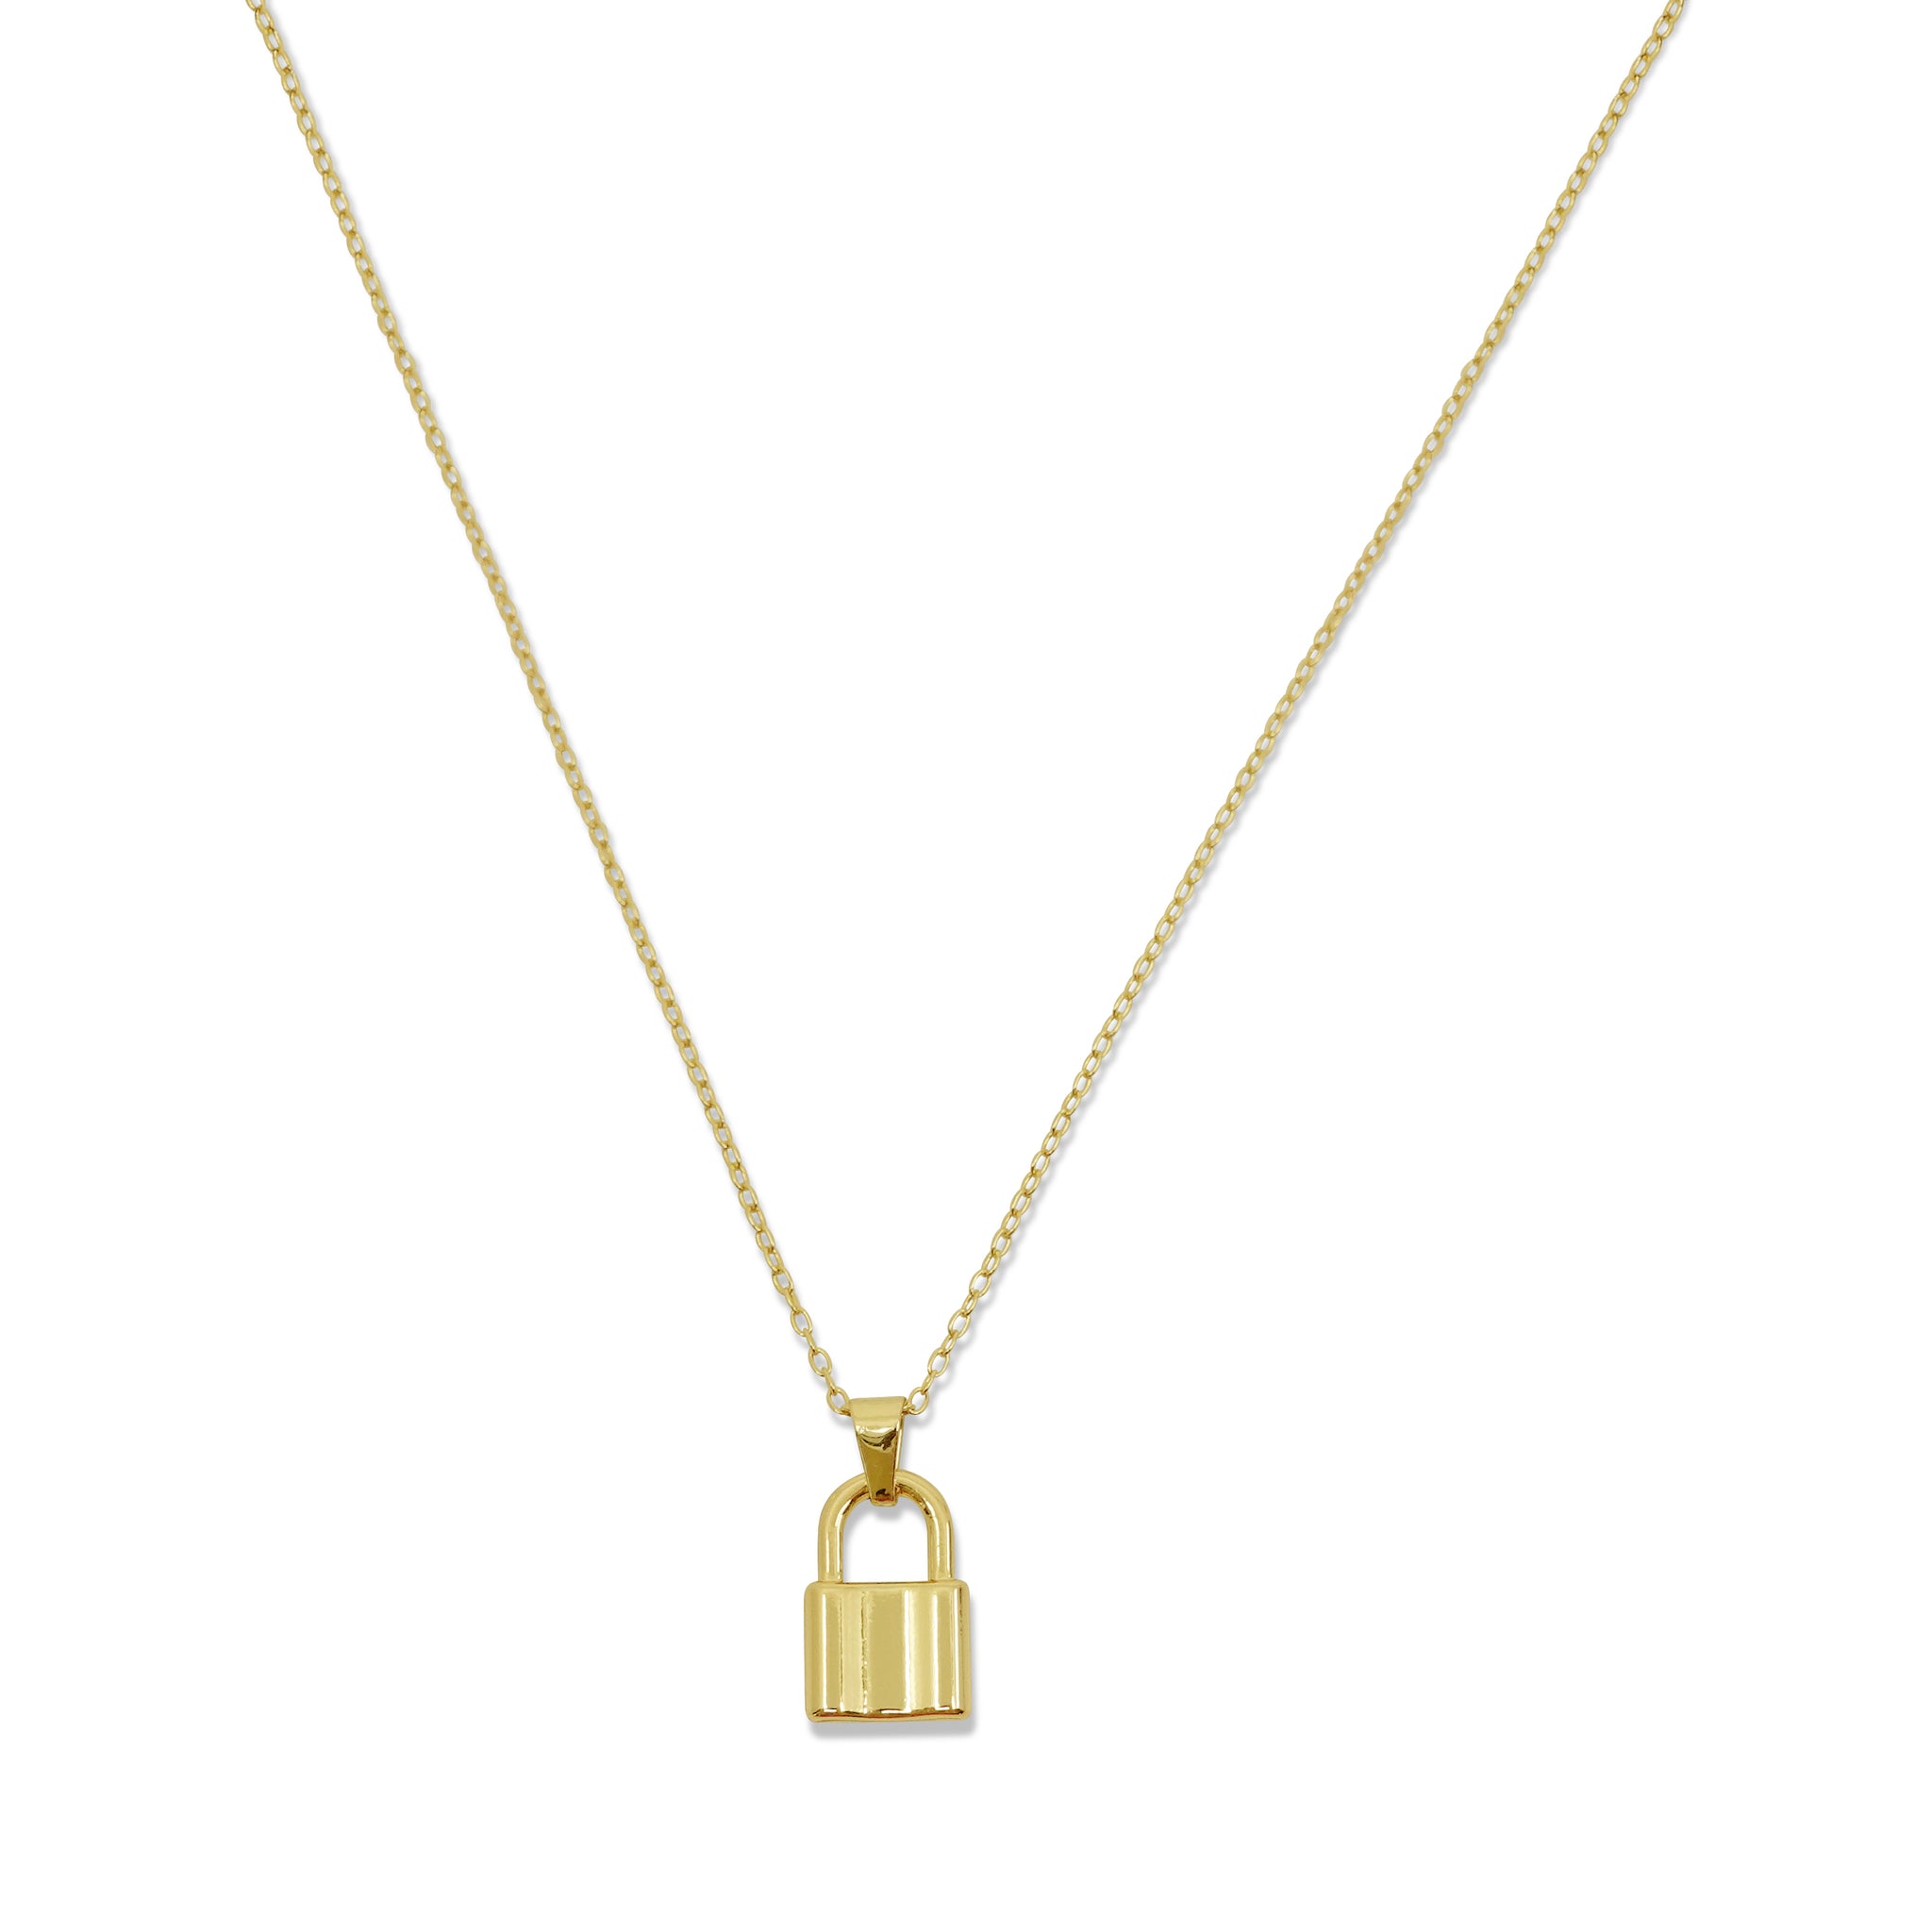 The Padlock Gold Necklace